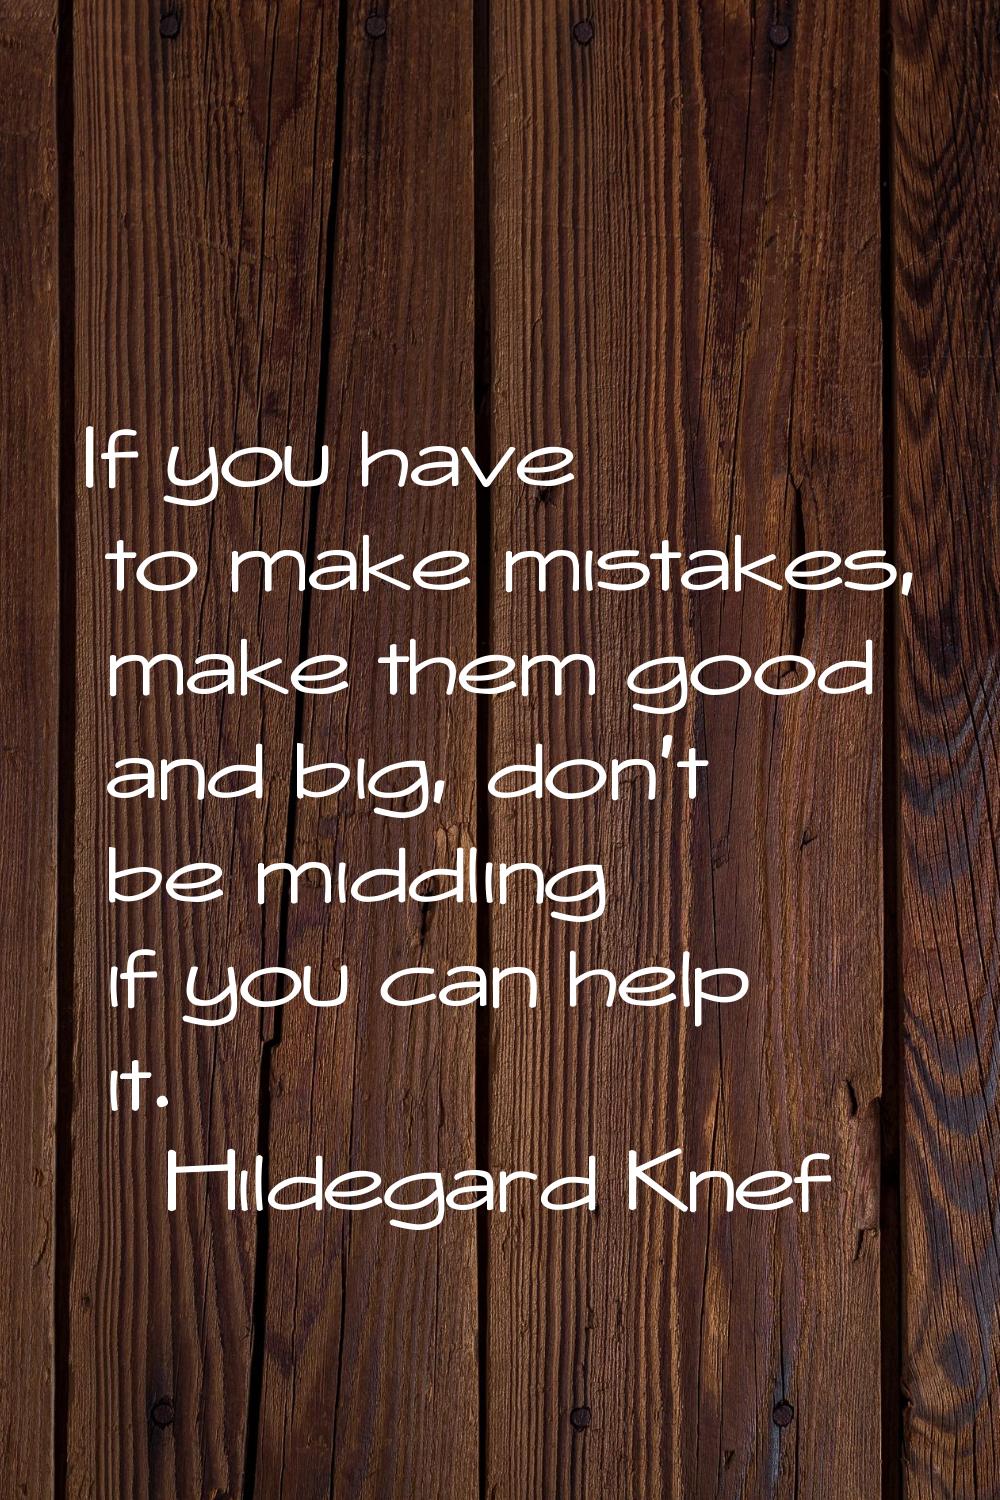 If you have to make mistakes, make them good and big, don't be middling if you can help it.